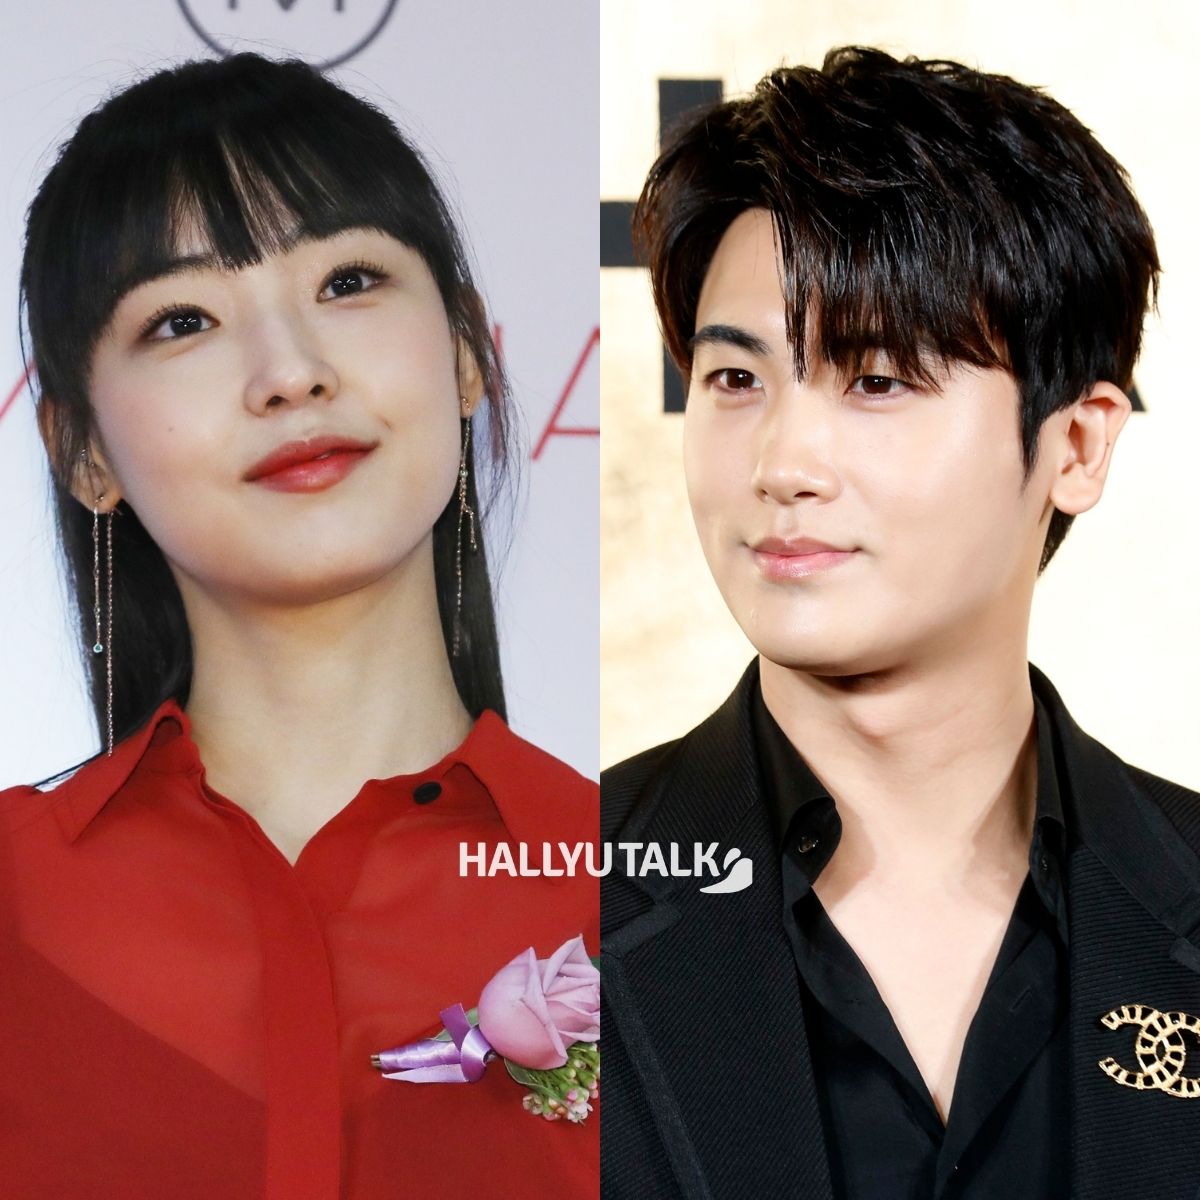 Jeon So Nee and Park Hyung Sik might star together in a new drama